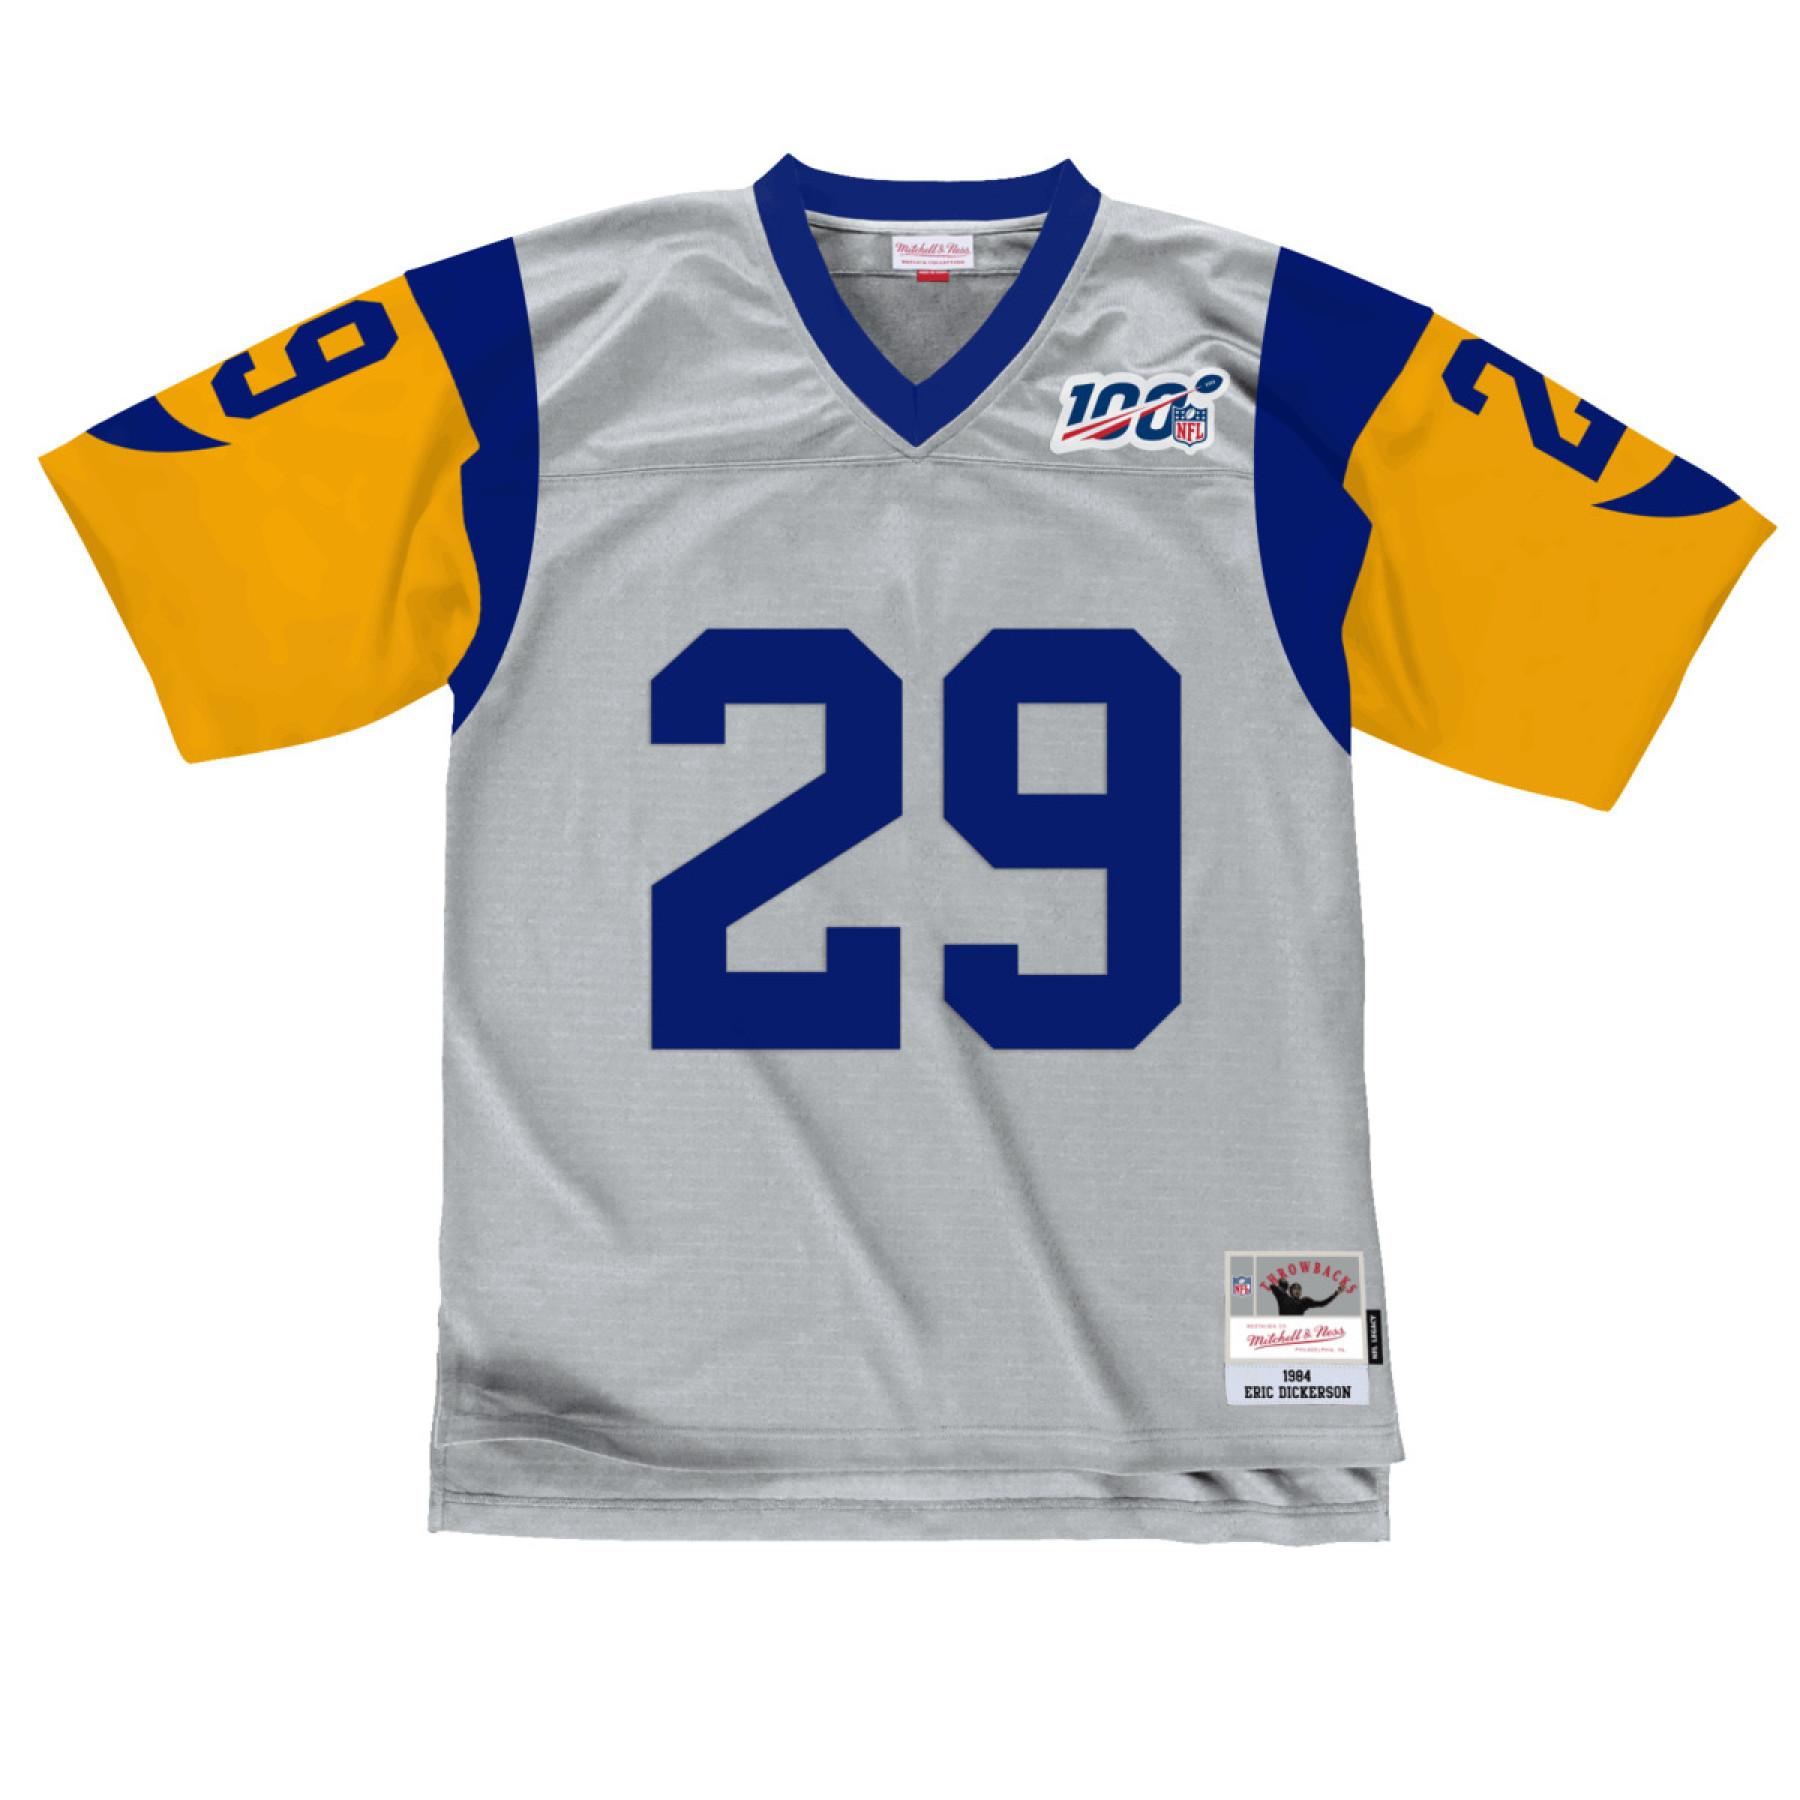 Maillot vintage Los Angeles Rams platinum Eric Dickerson